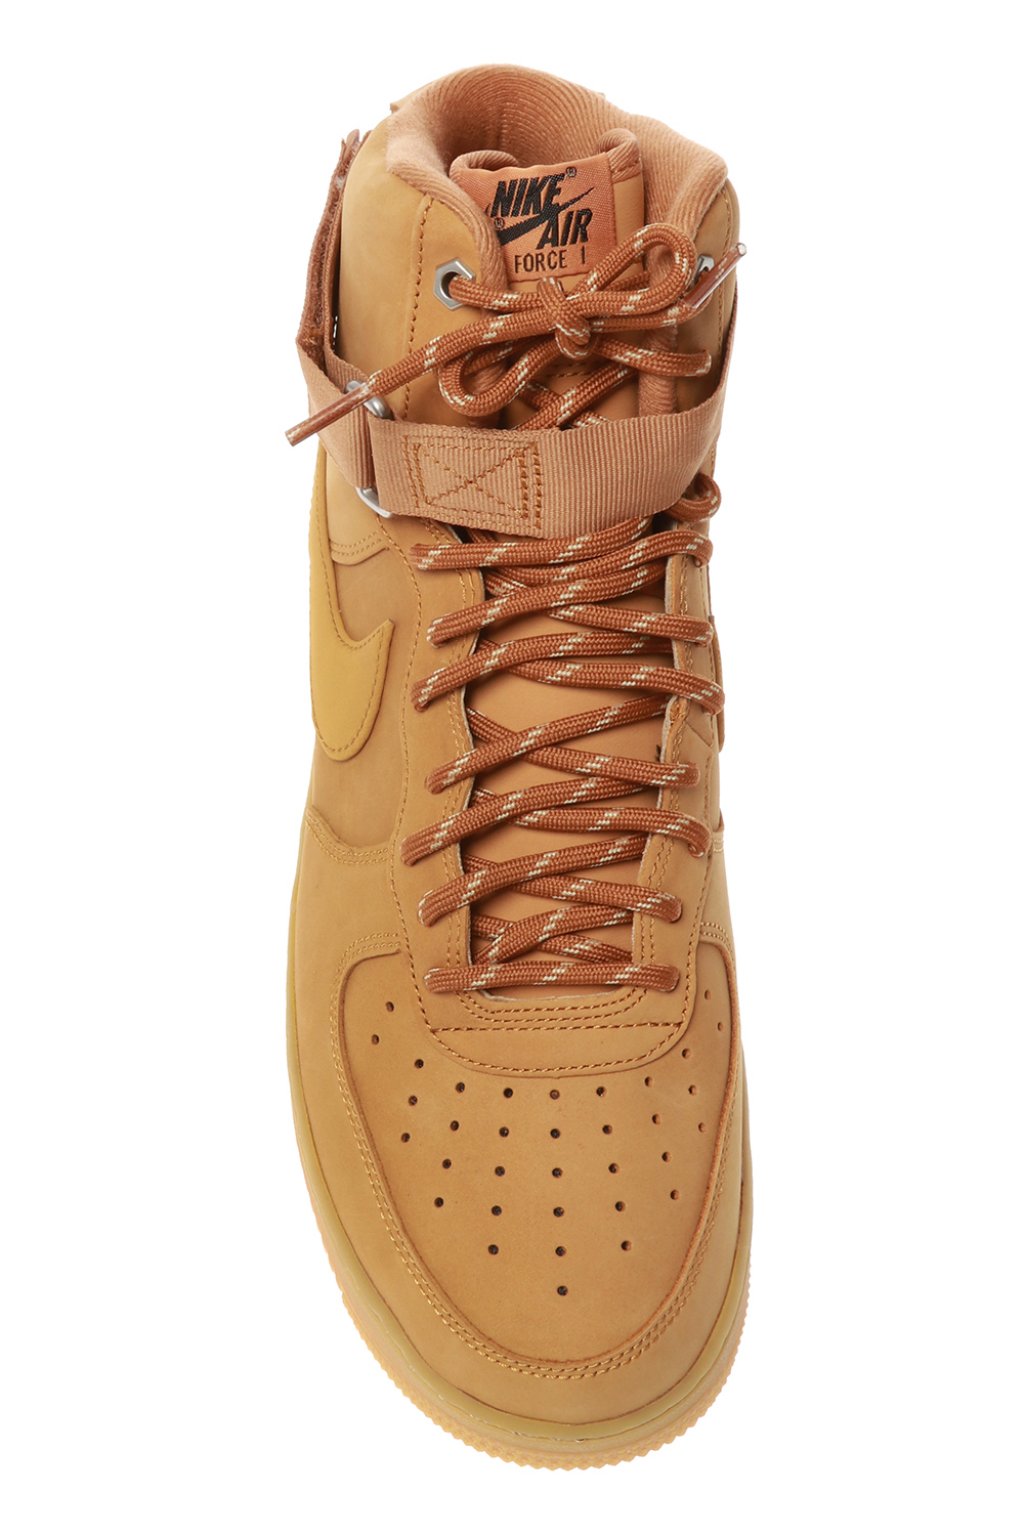 brown nike shoes high tops